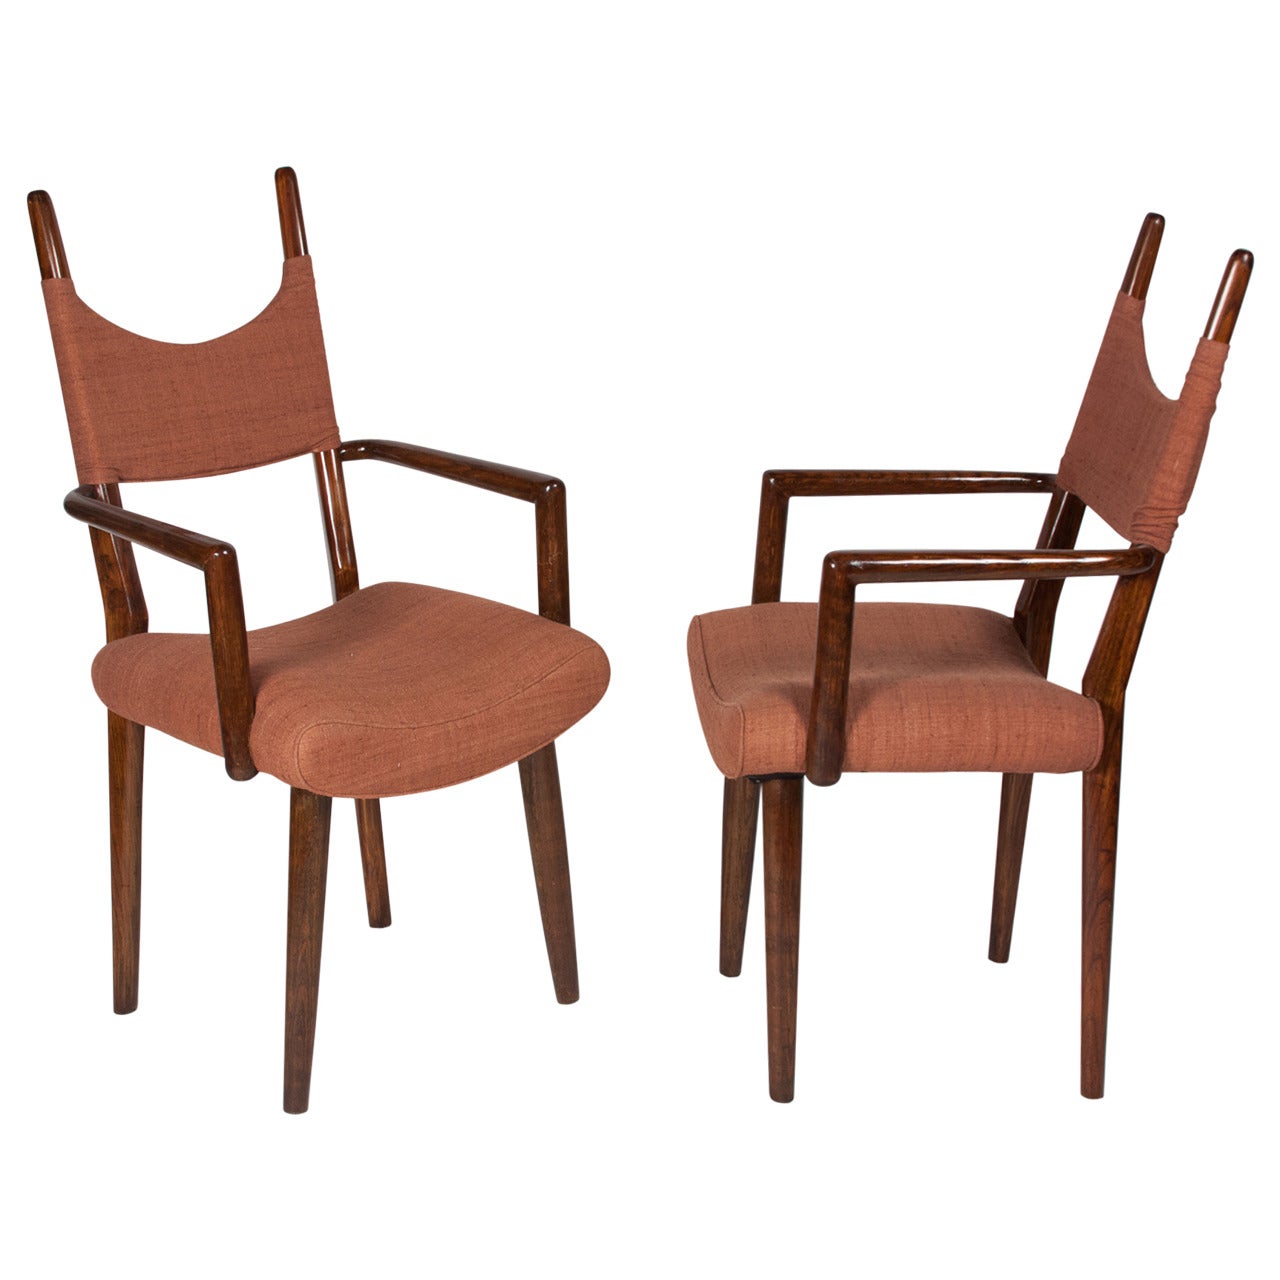 Pair of Palissandre Dining Chairs by Jean Royere, French, 1950s For Sale